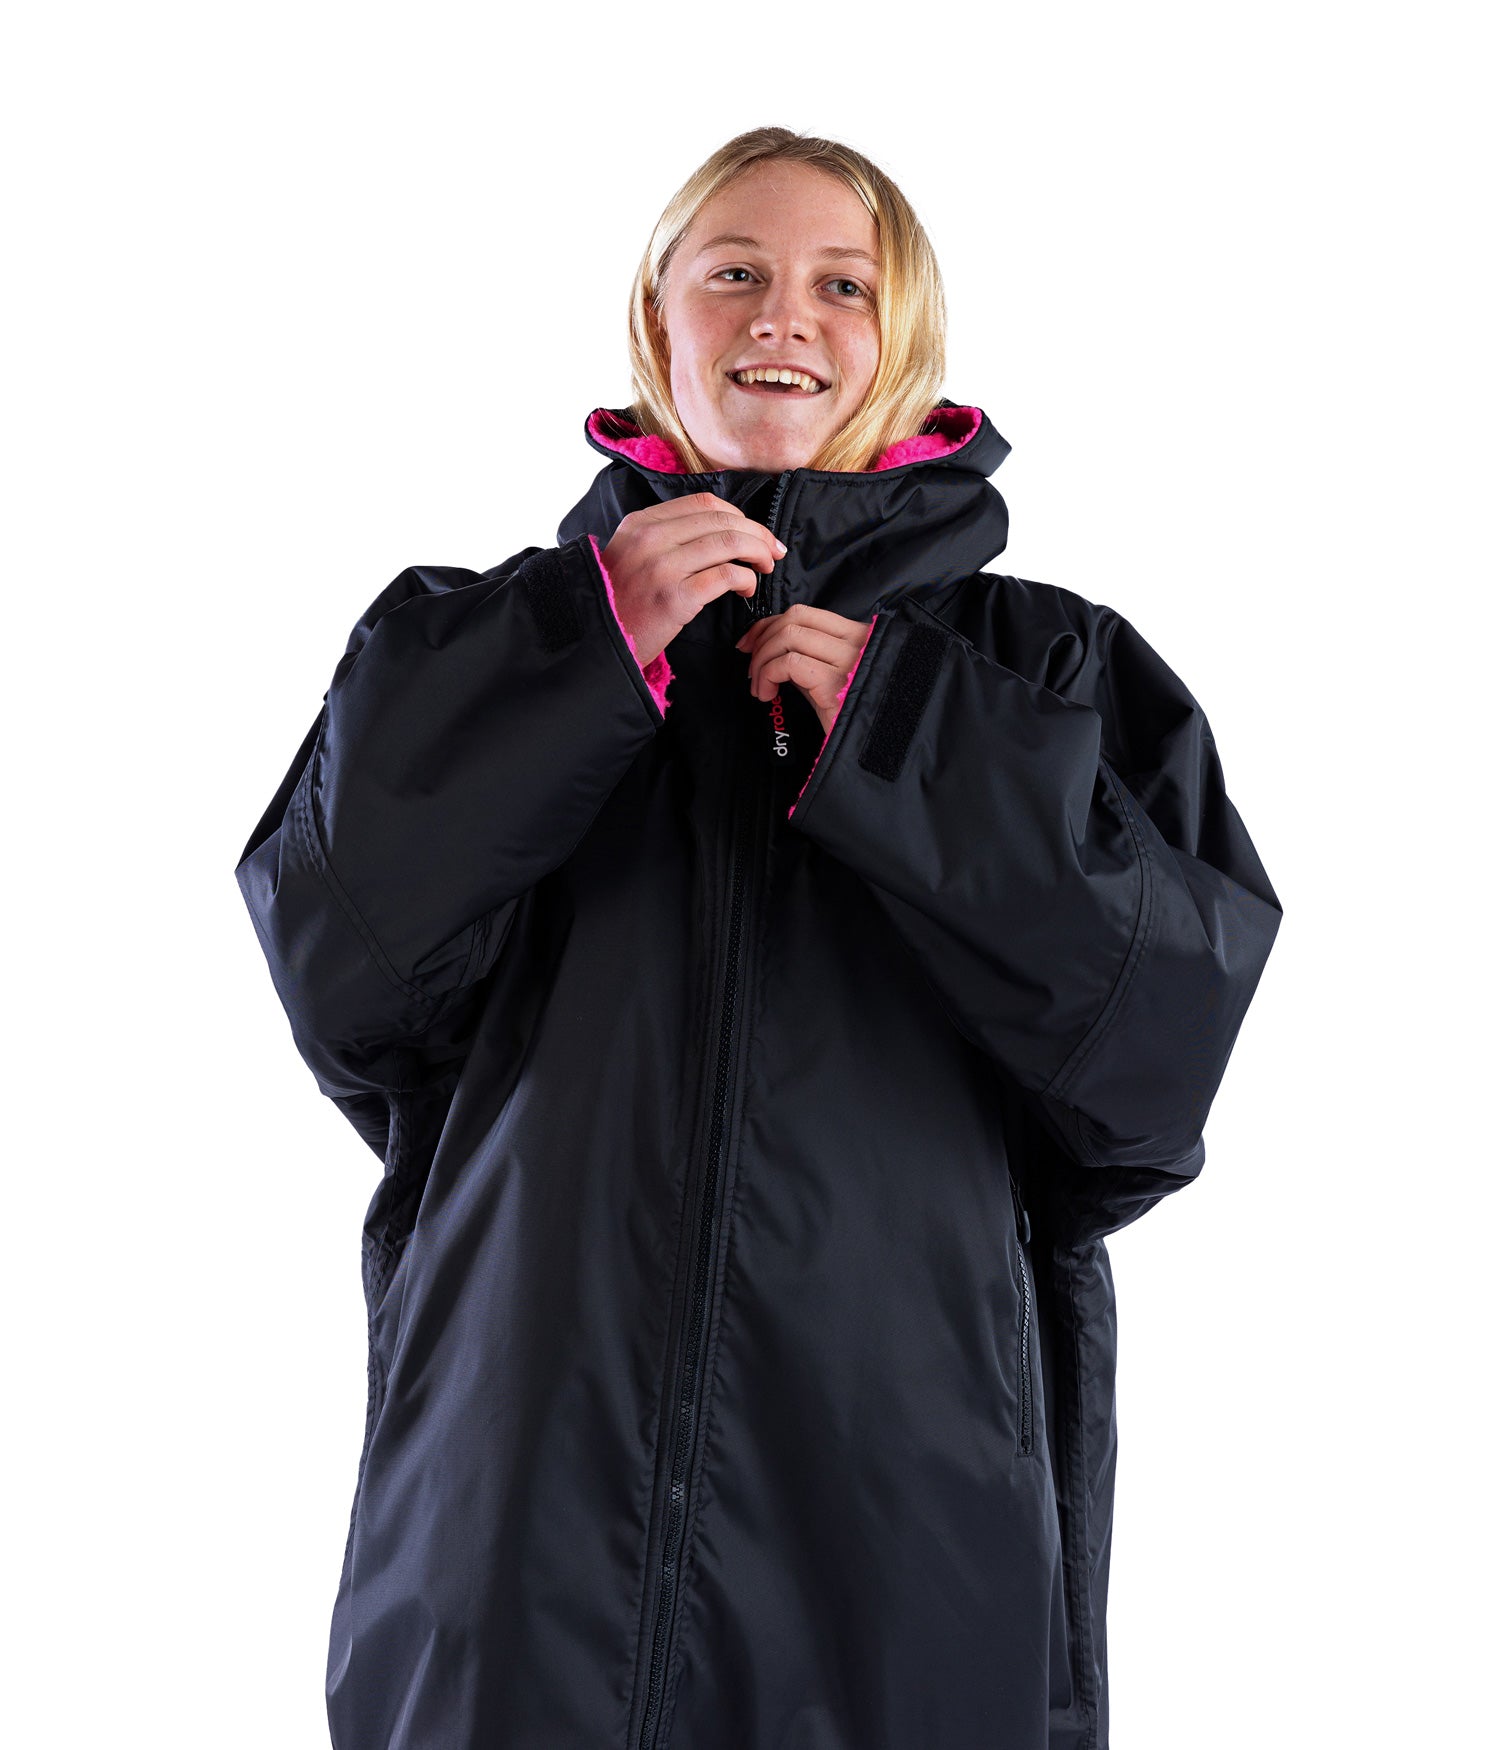 Stay protected from the weather in the Dryrobe Advance range for Kids